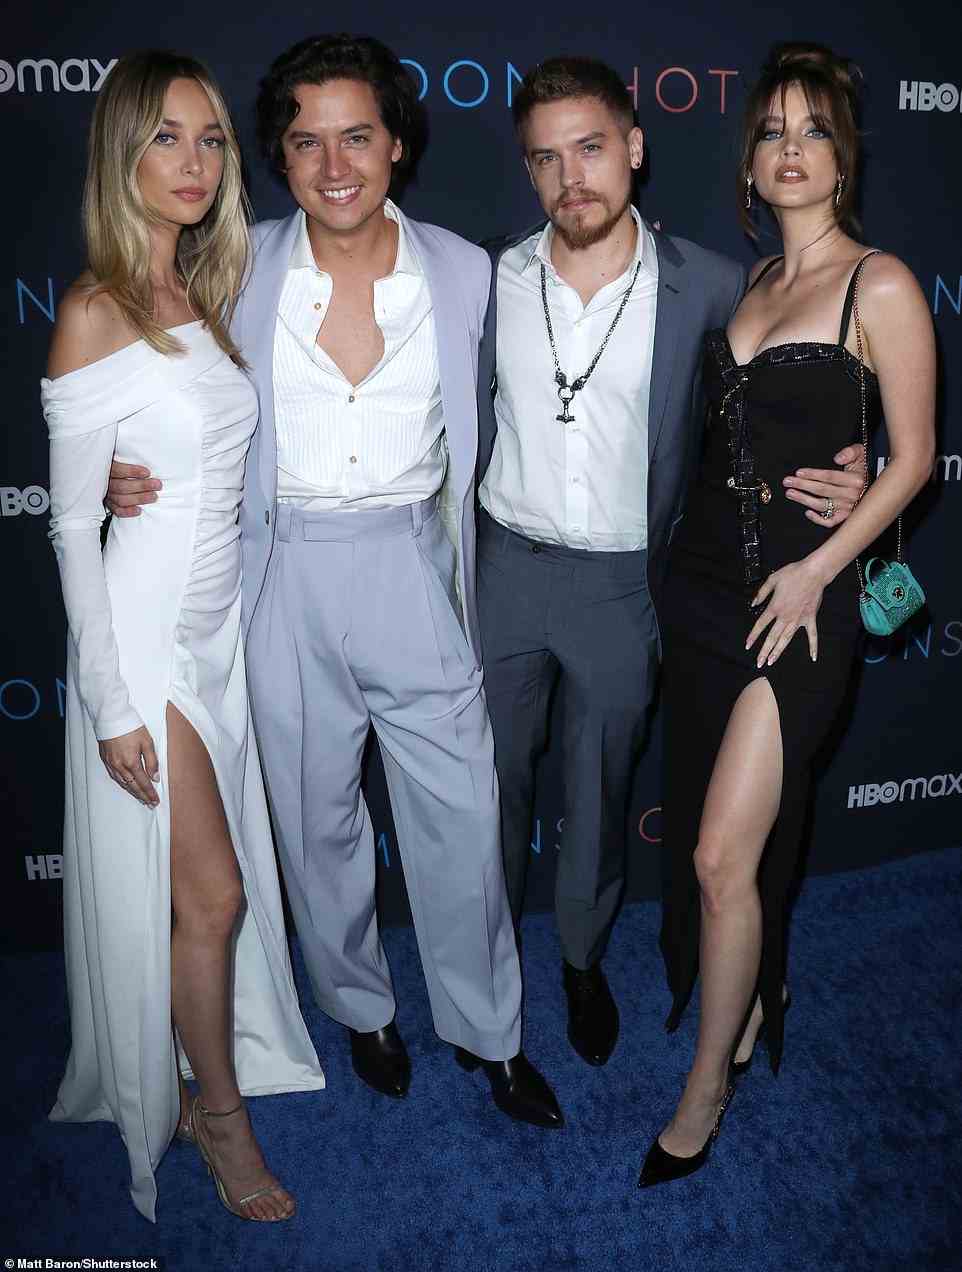 Cute foursome: Cole Sprouse cut a dapper figure in a gray suit as he and Ari Fournier were joined by his brother Dylan and Dylan's partner Barbara Palvin at the Moonshot premiere